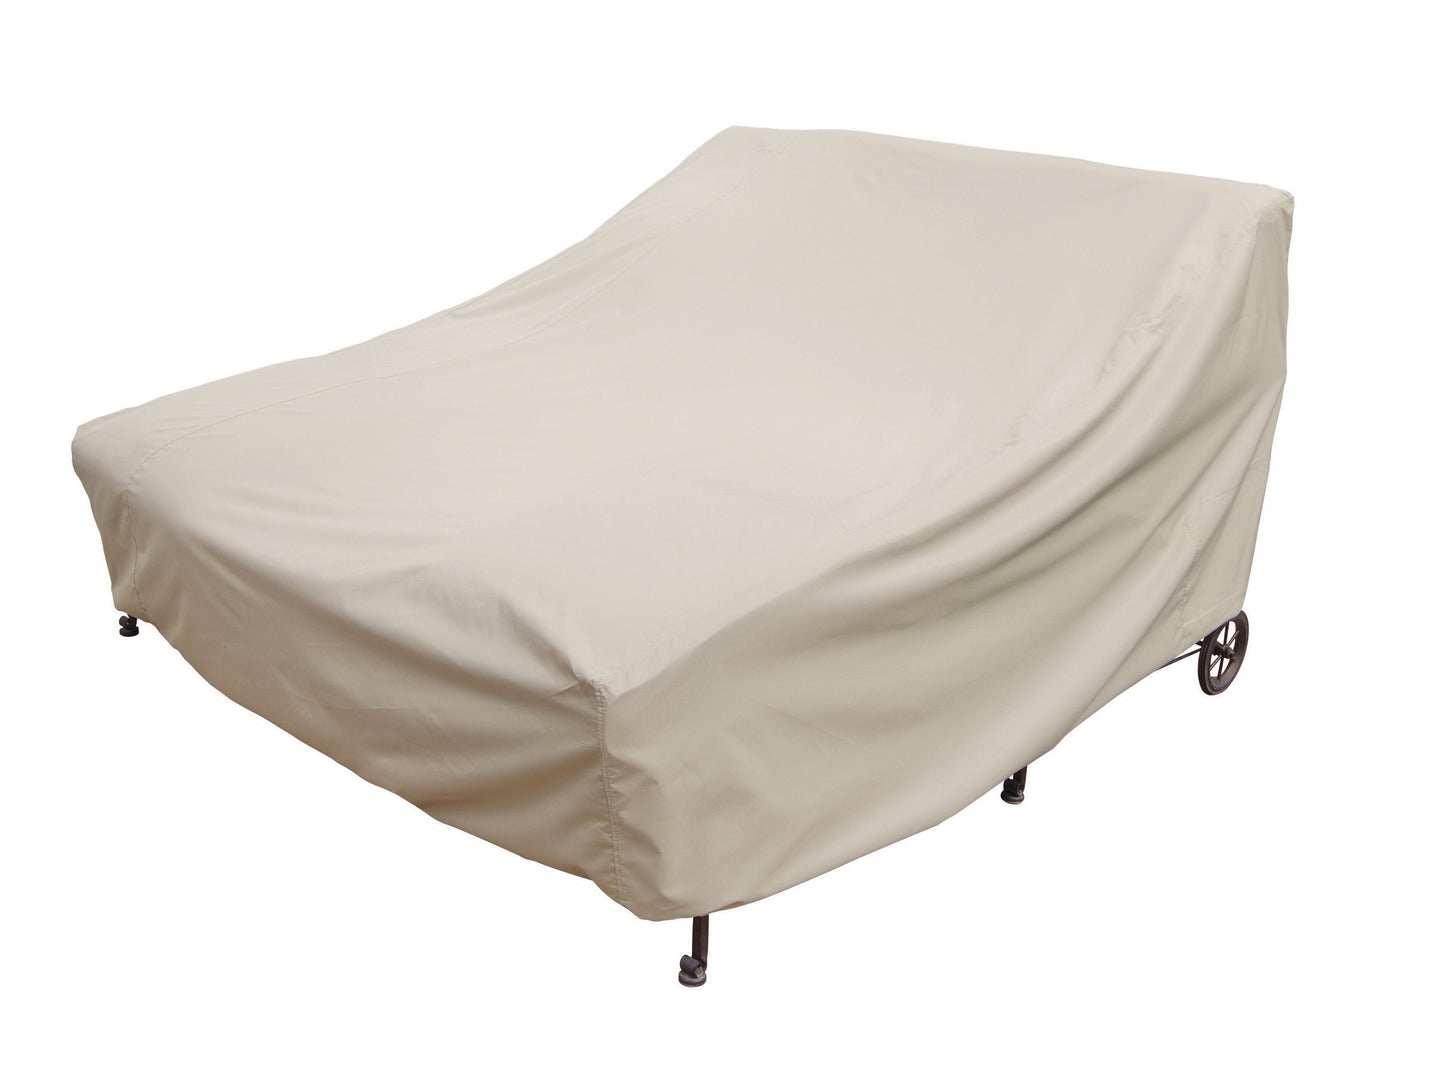 CP141 Double Chaise Lounge Cover